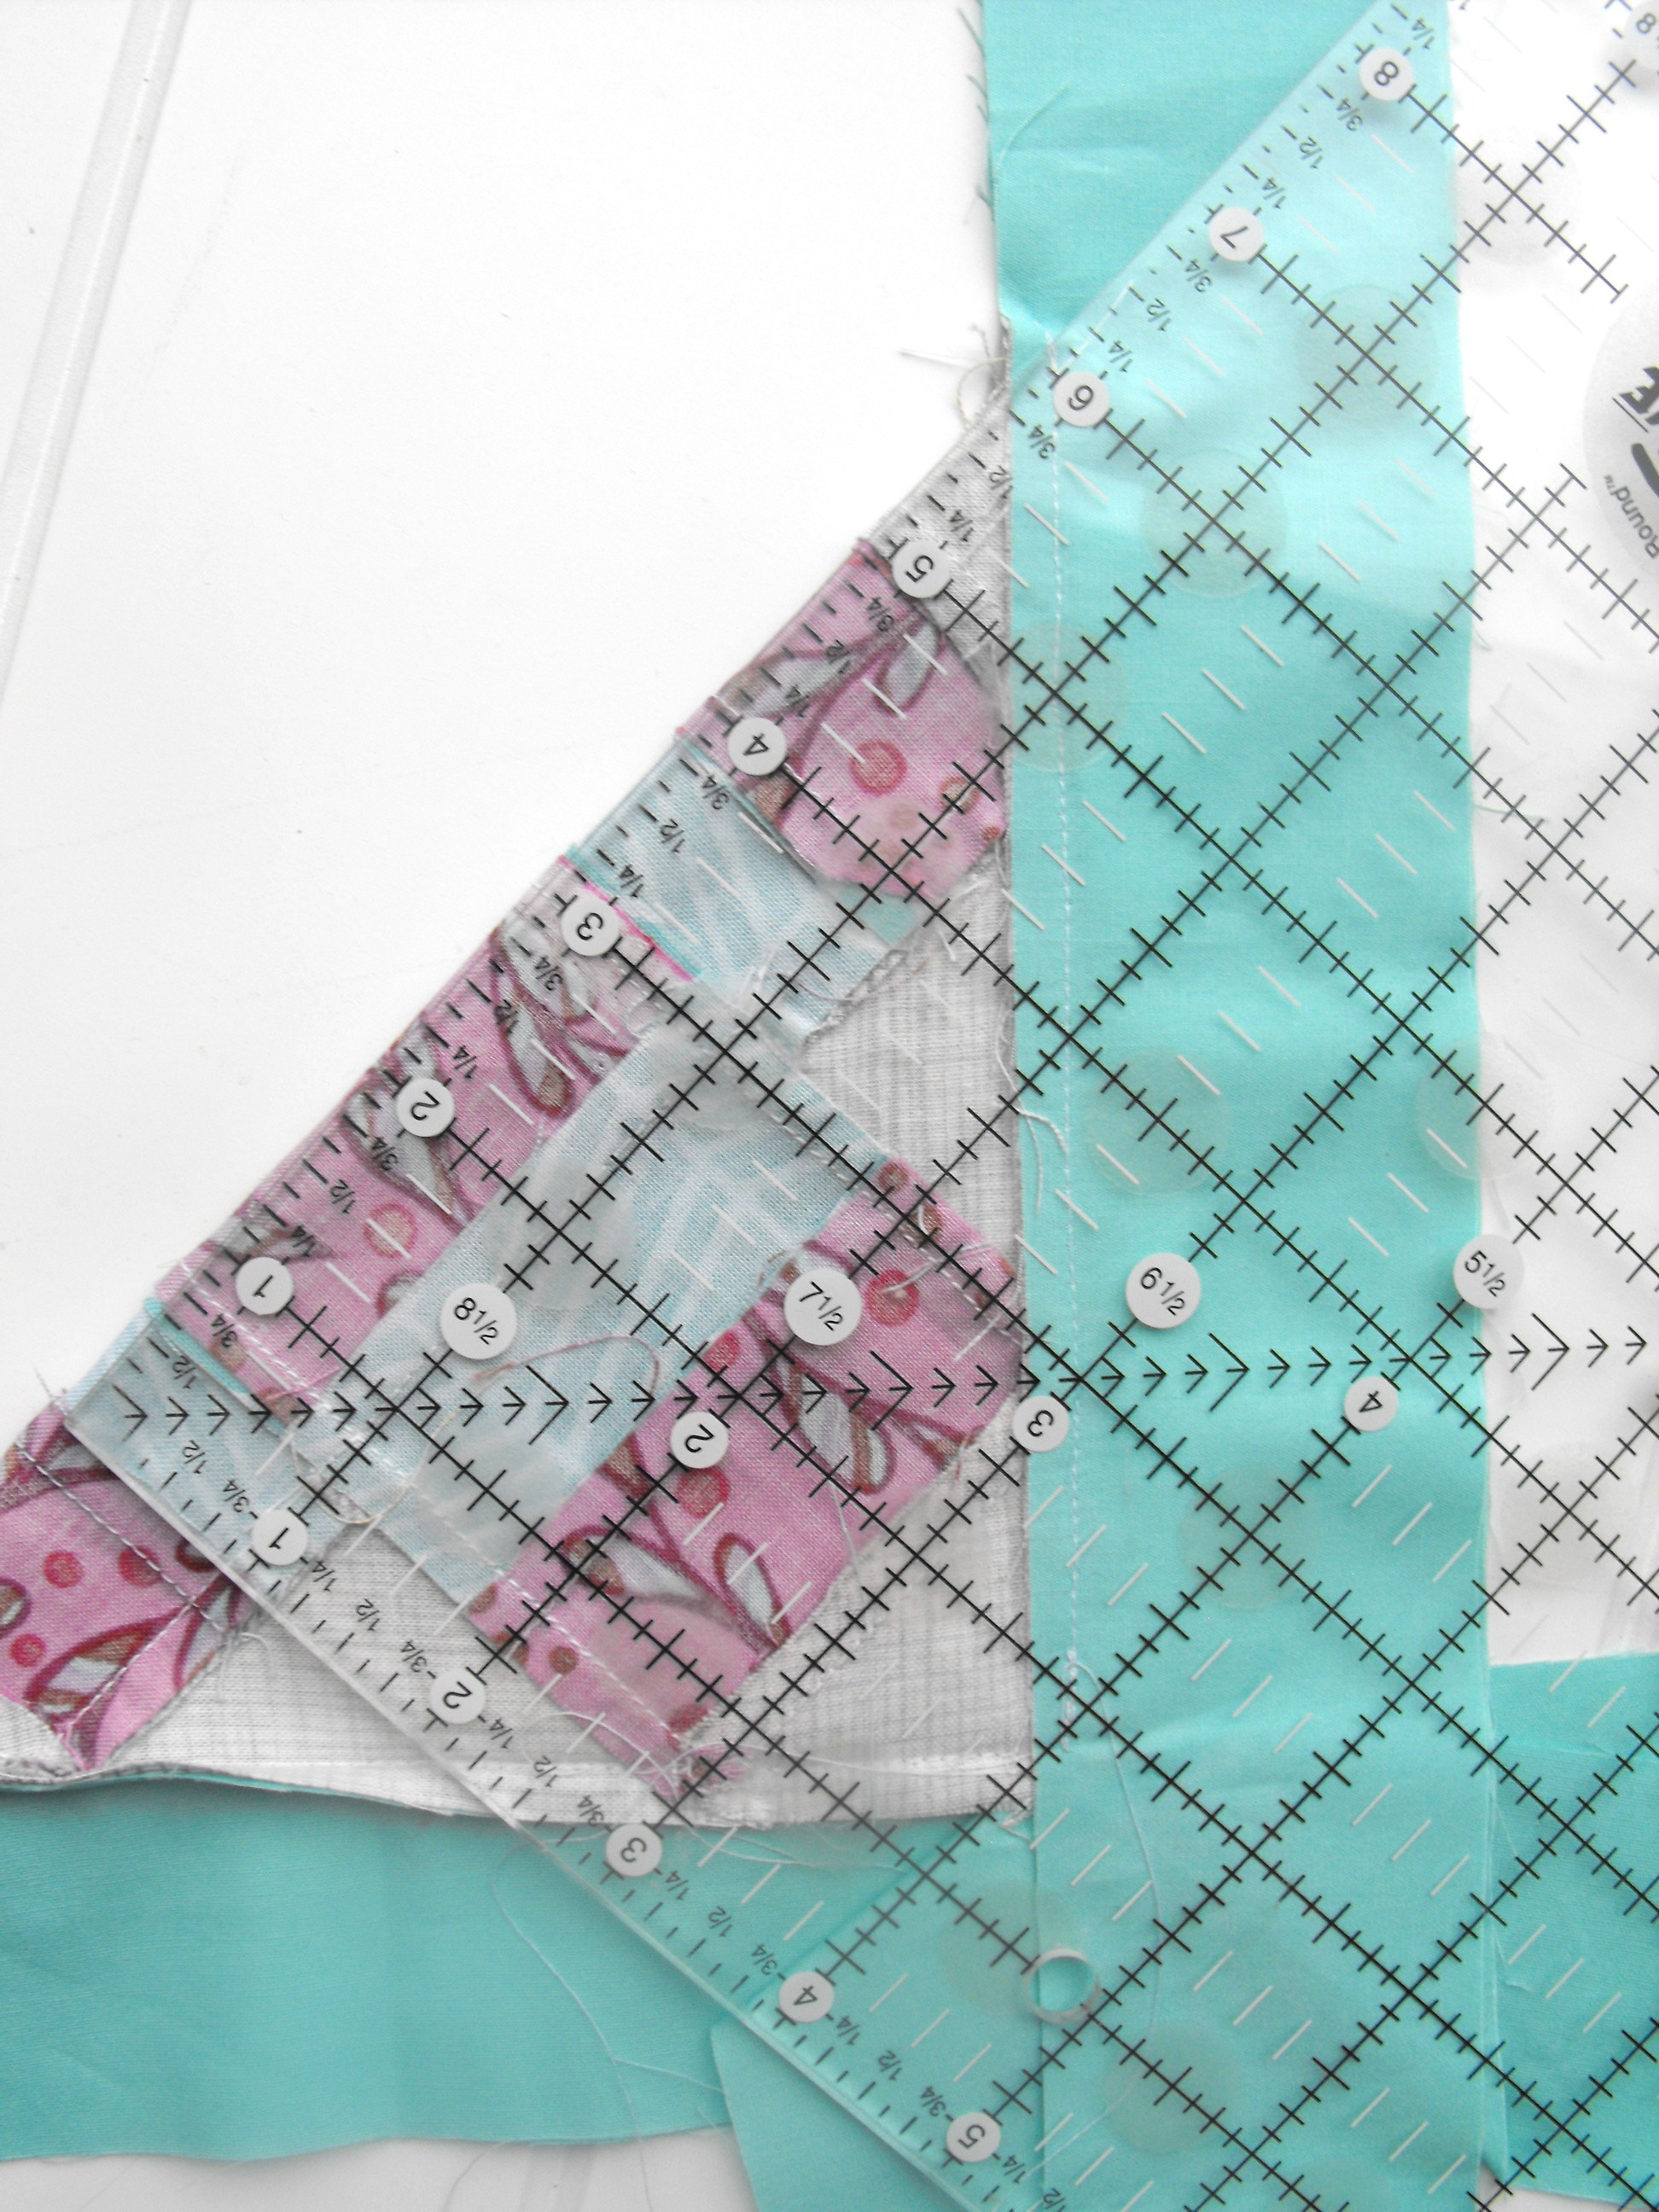 Sewing Quilt Borders Pieces Together